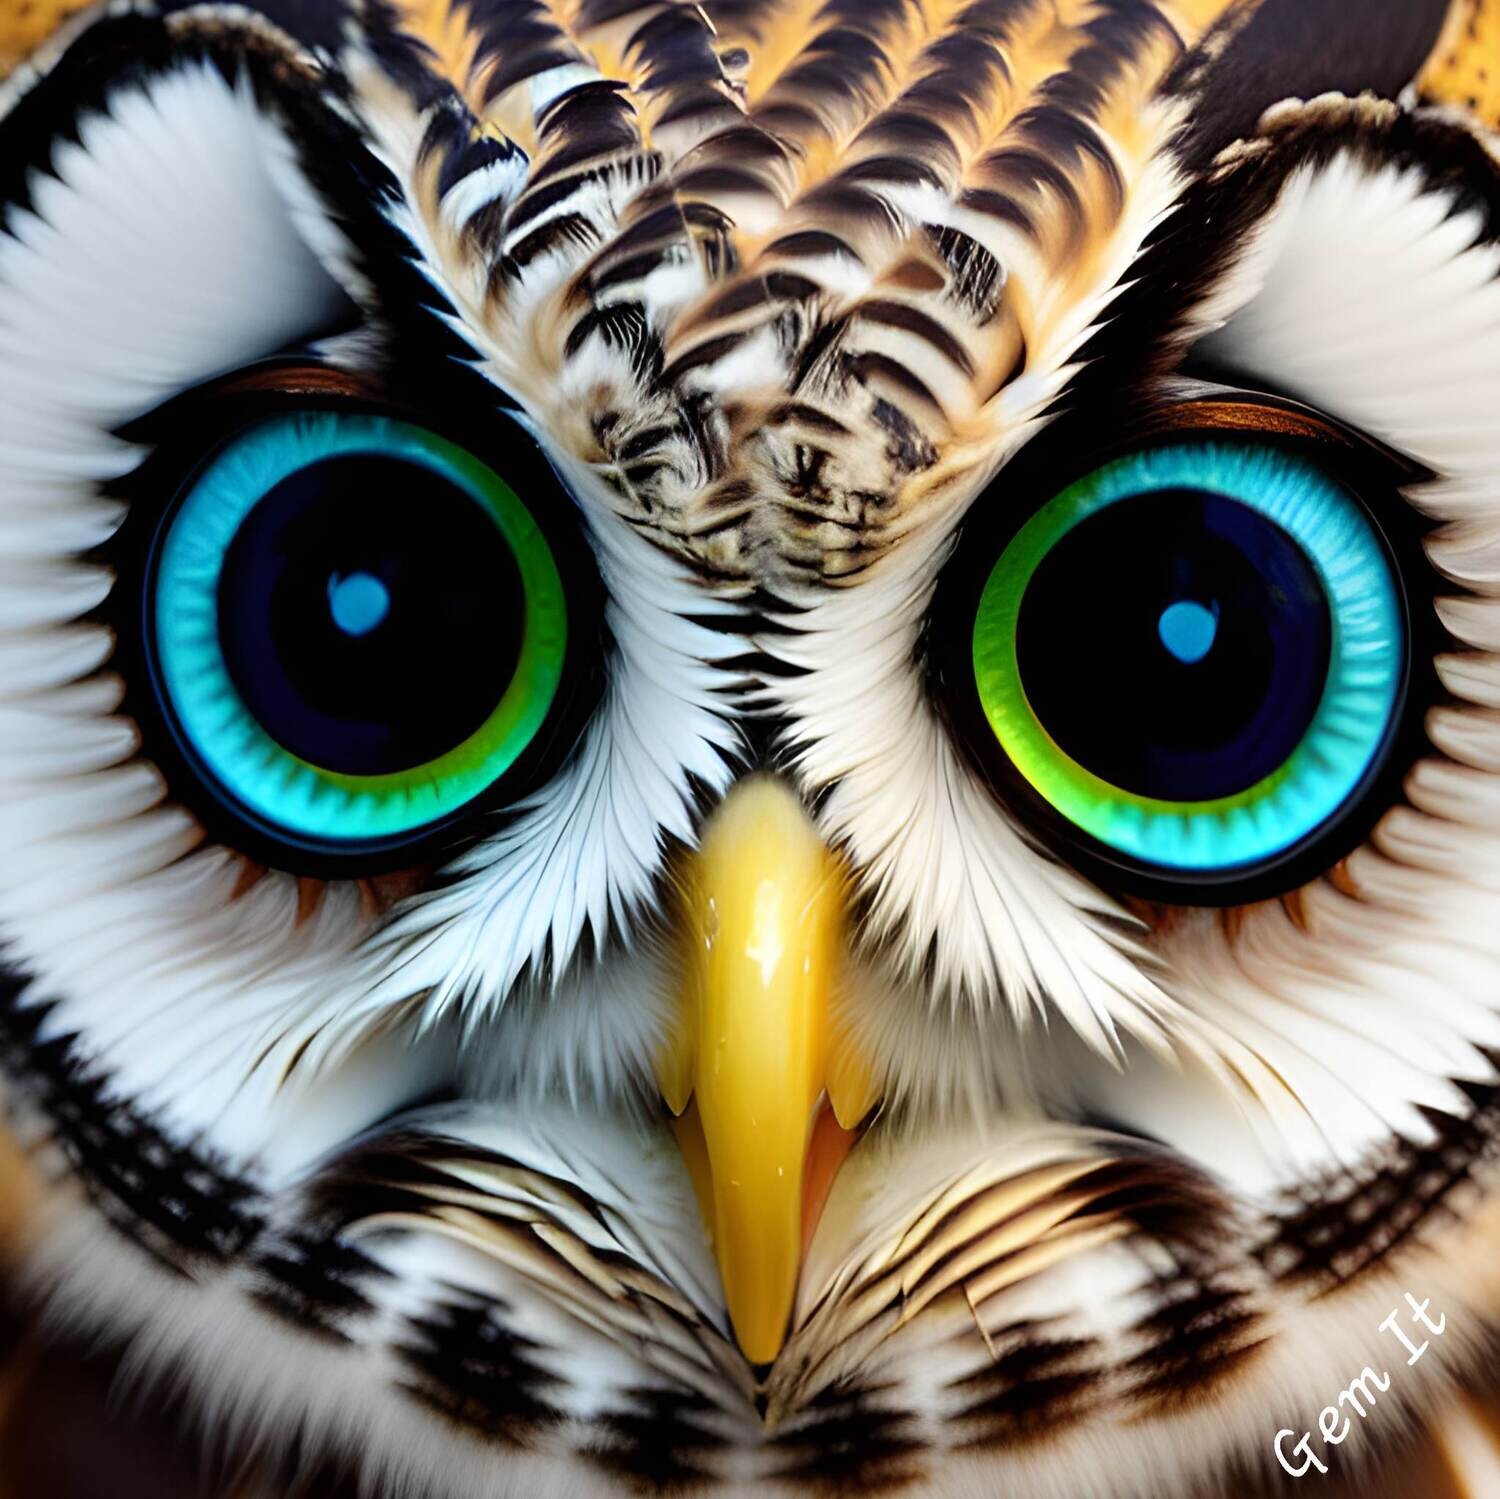 Owl Eyes 283 - Full Drill Diamond Painting - Specially ordered for you. Delivery is approximately 4 - 6 weeks.